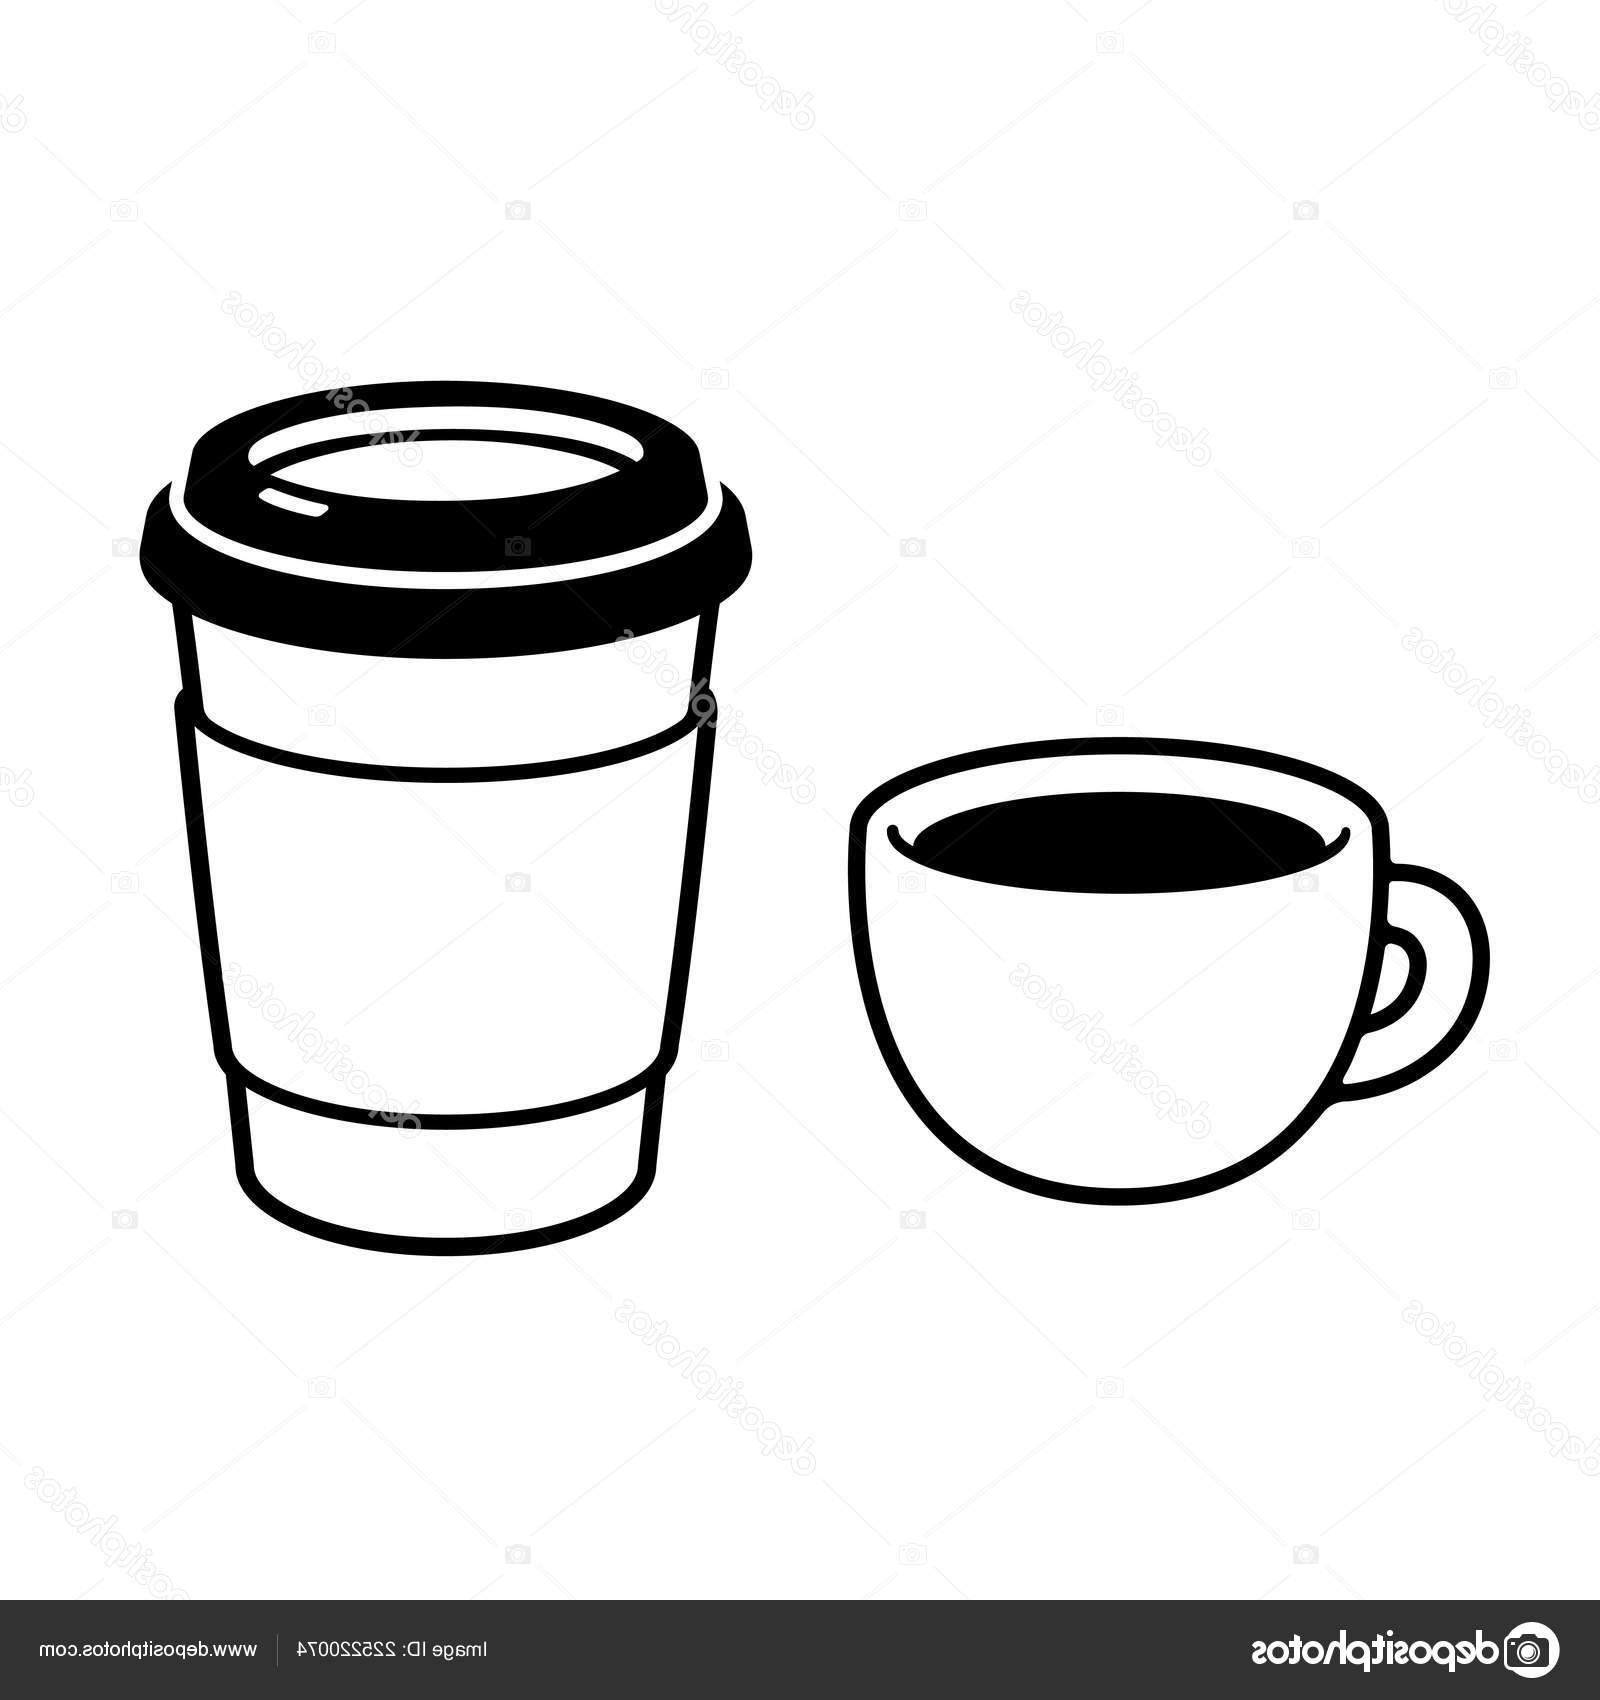 clipart cup cup design